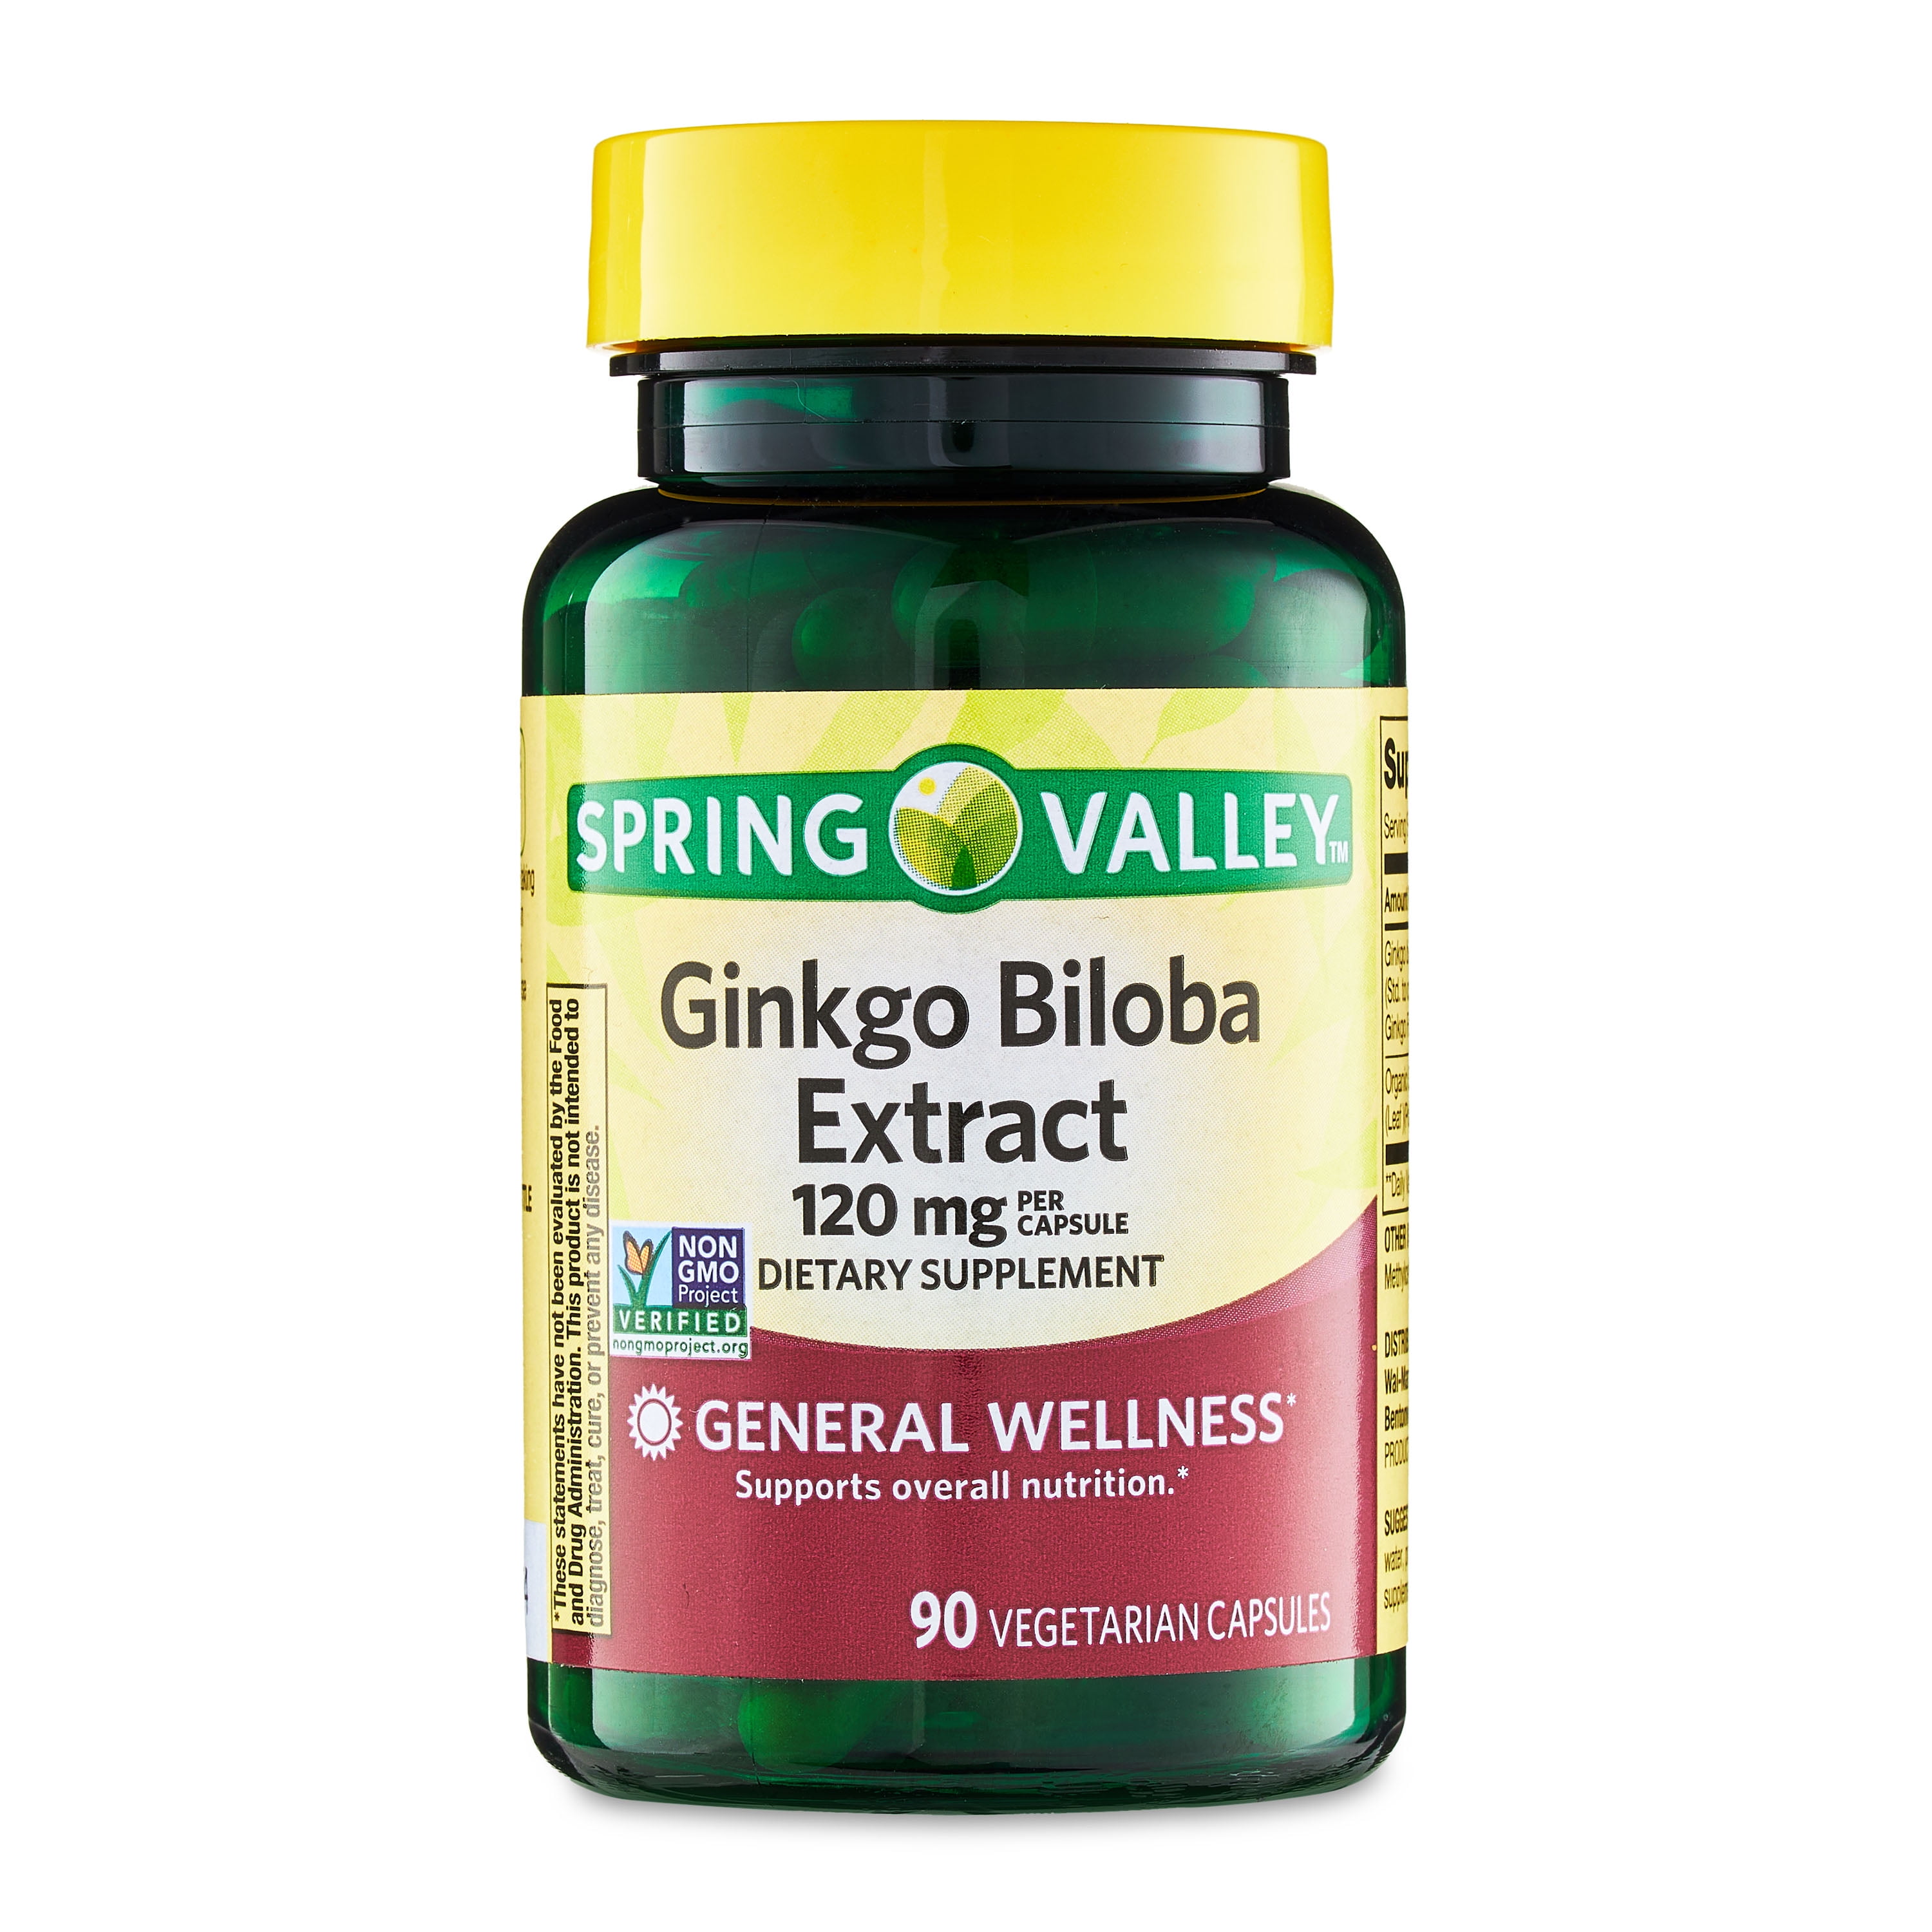 Spring Valley Ginkgo Biloba Extract 120 mg, 90 count